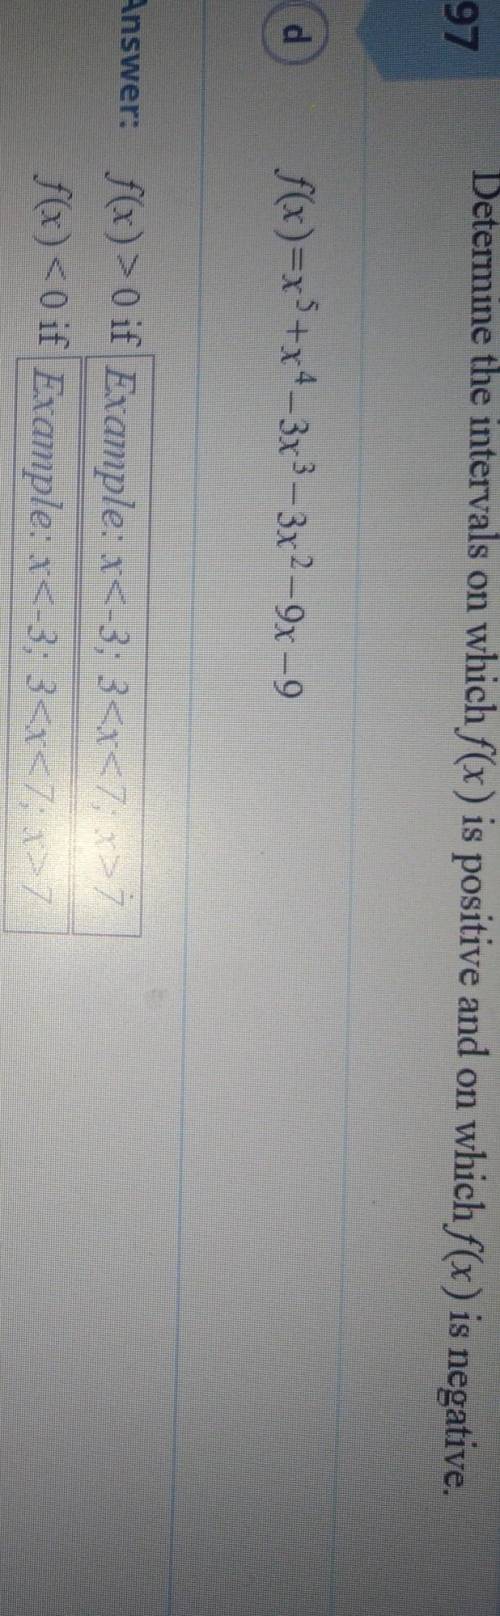 Determine the intervals on which f(x) is positive and on which f(x) is negative. PLS HELP​